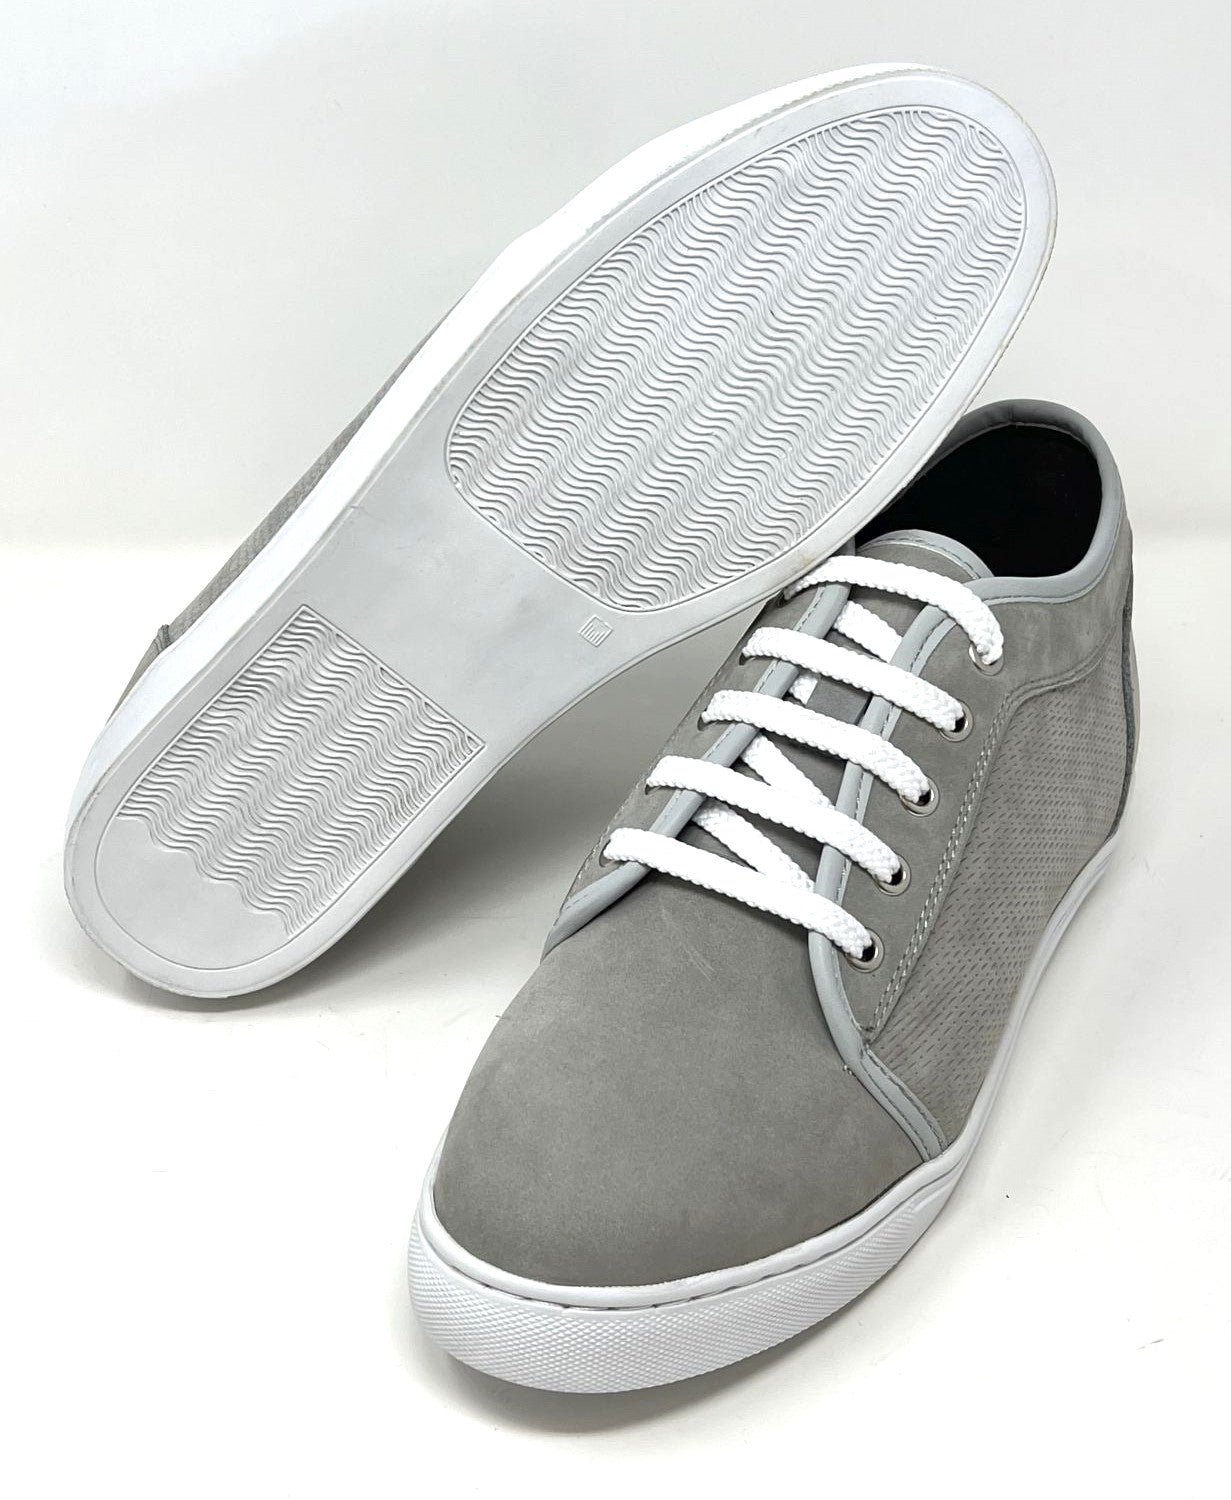 FSK0112- 2.4 Inches Taller (Grey) - Size 9 Only